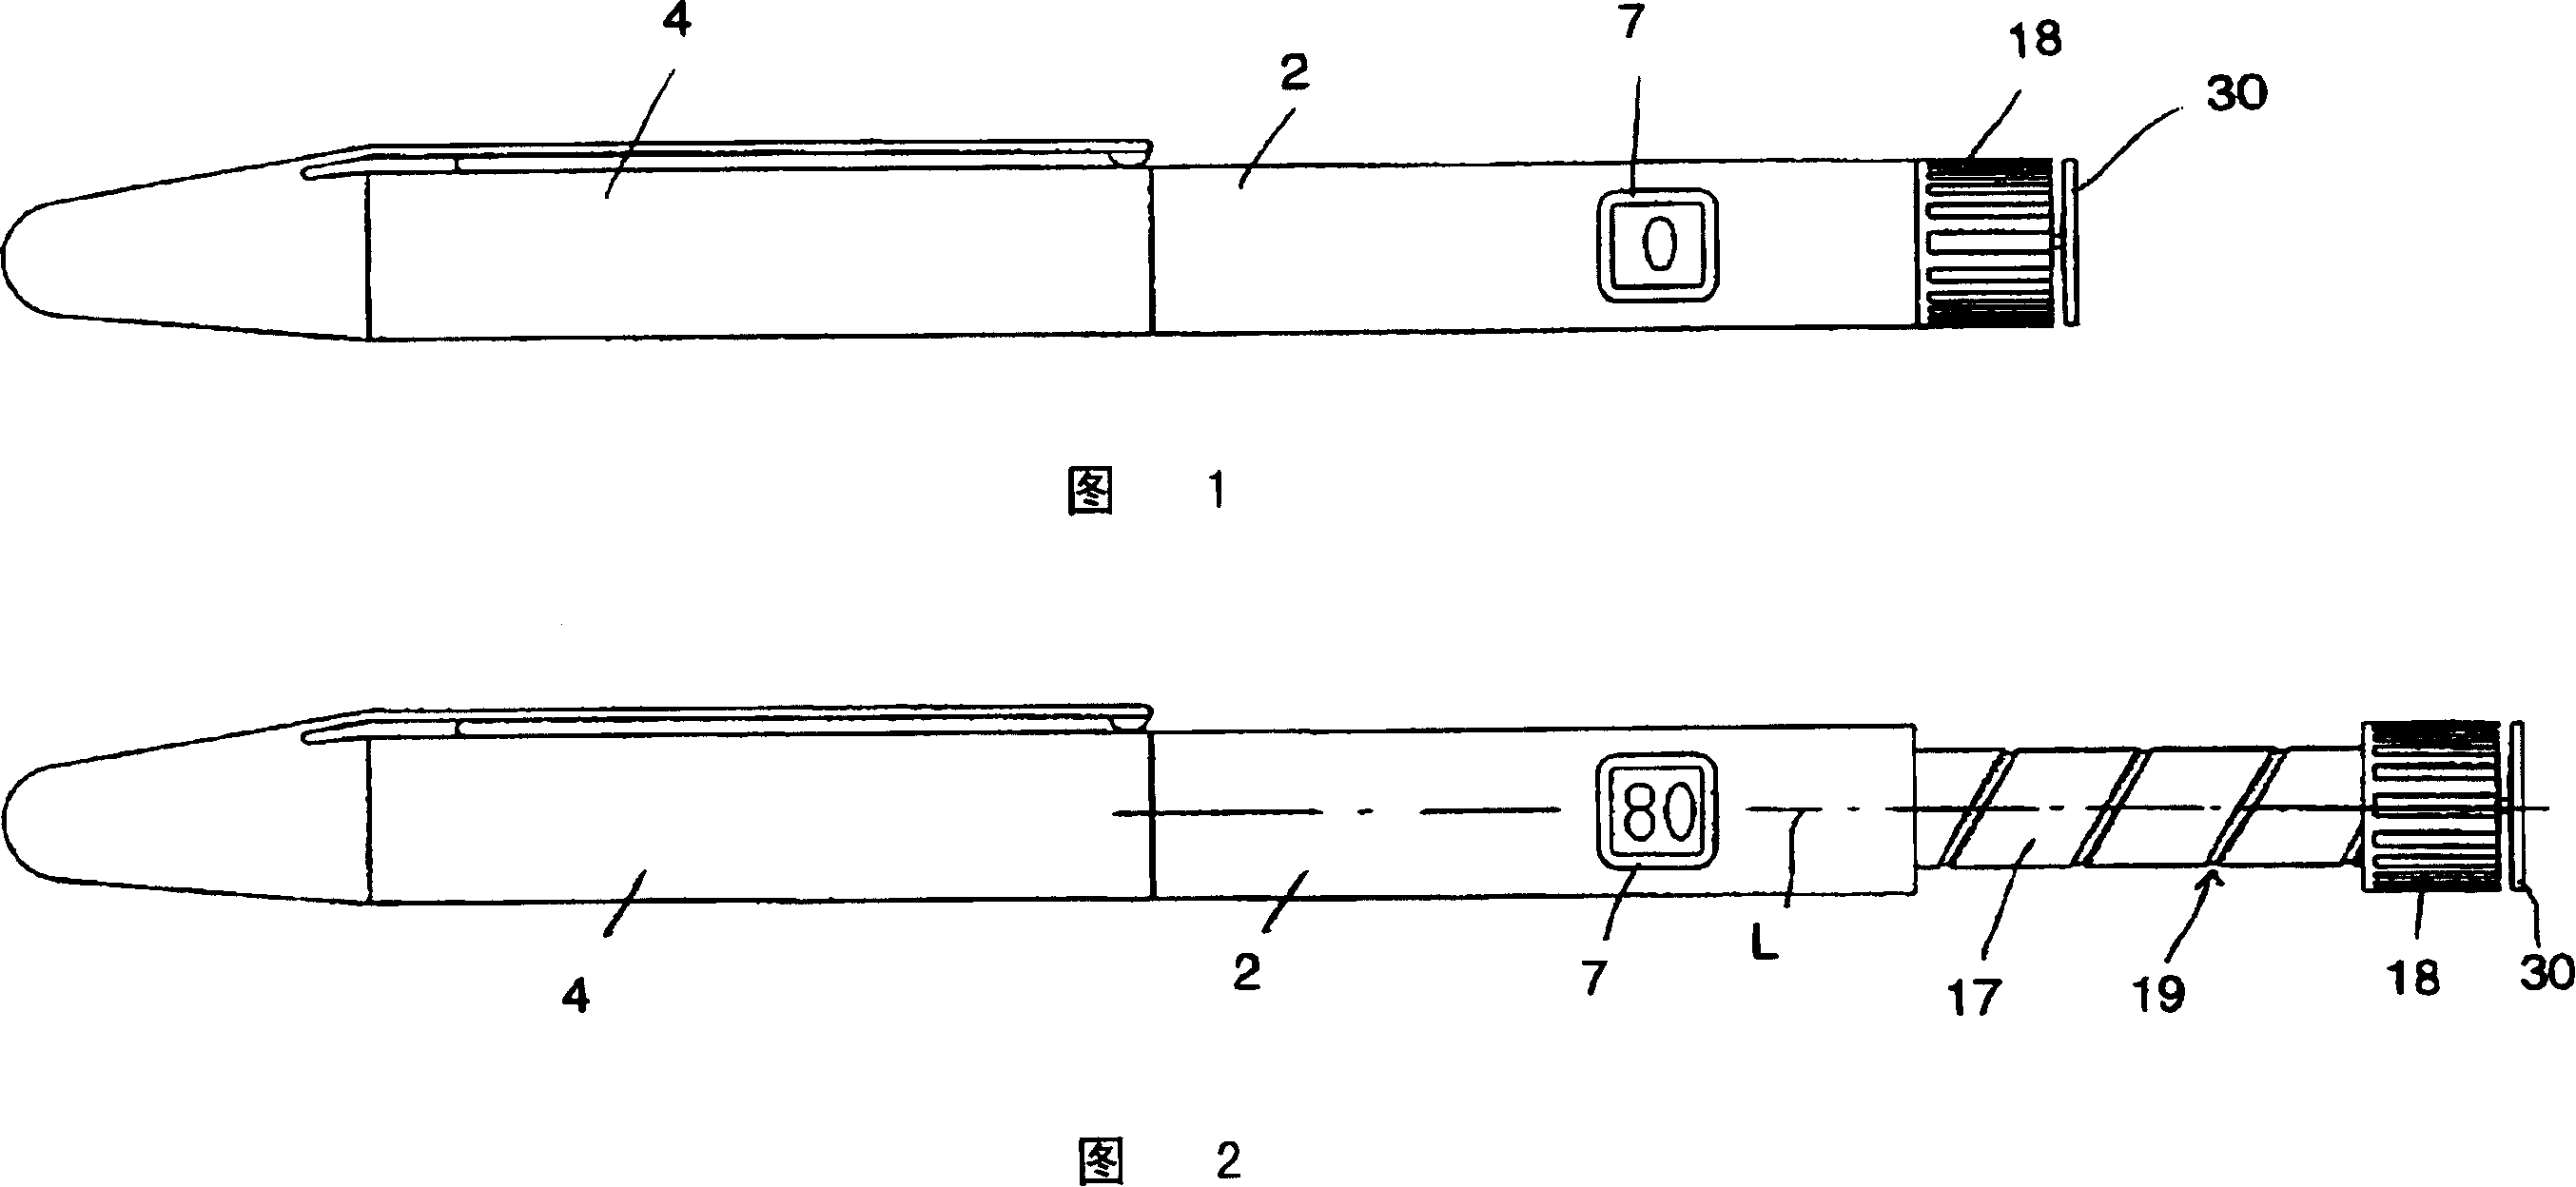 Administering device with display barrel